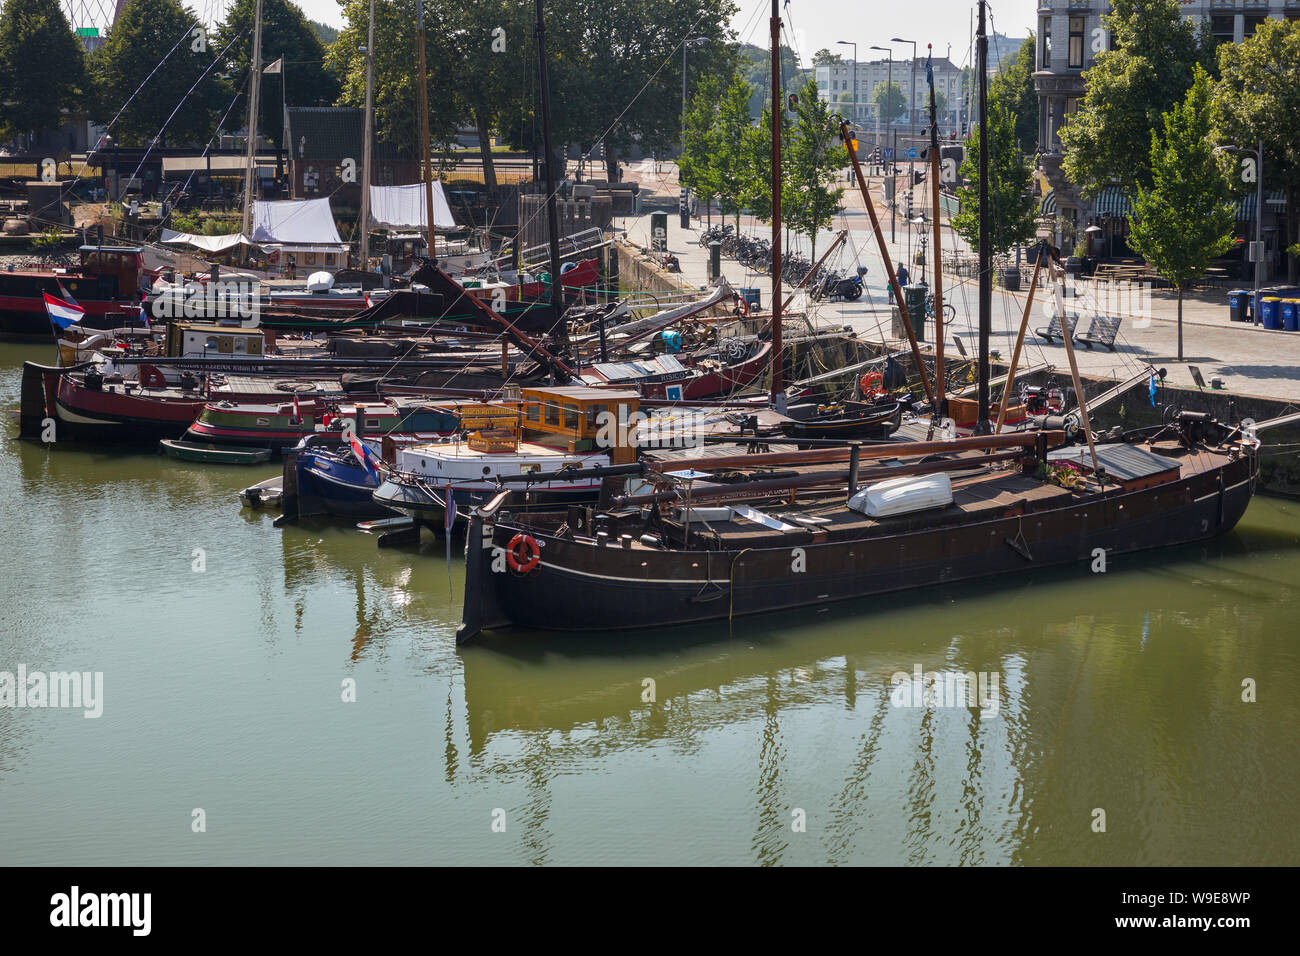 Rotterdam, Holland - July 30, 2019: Historical ships in the Oude Haven, Old Port, part of the Maritime District Stock Photo